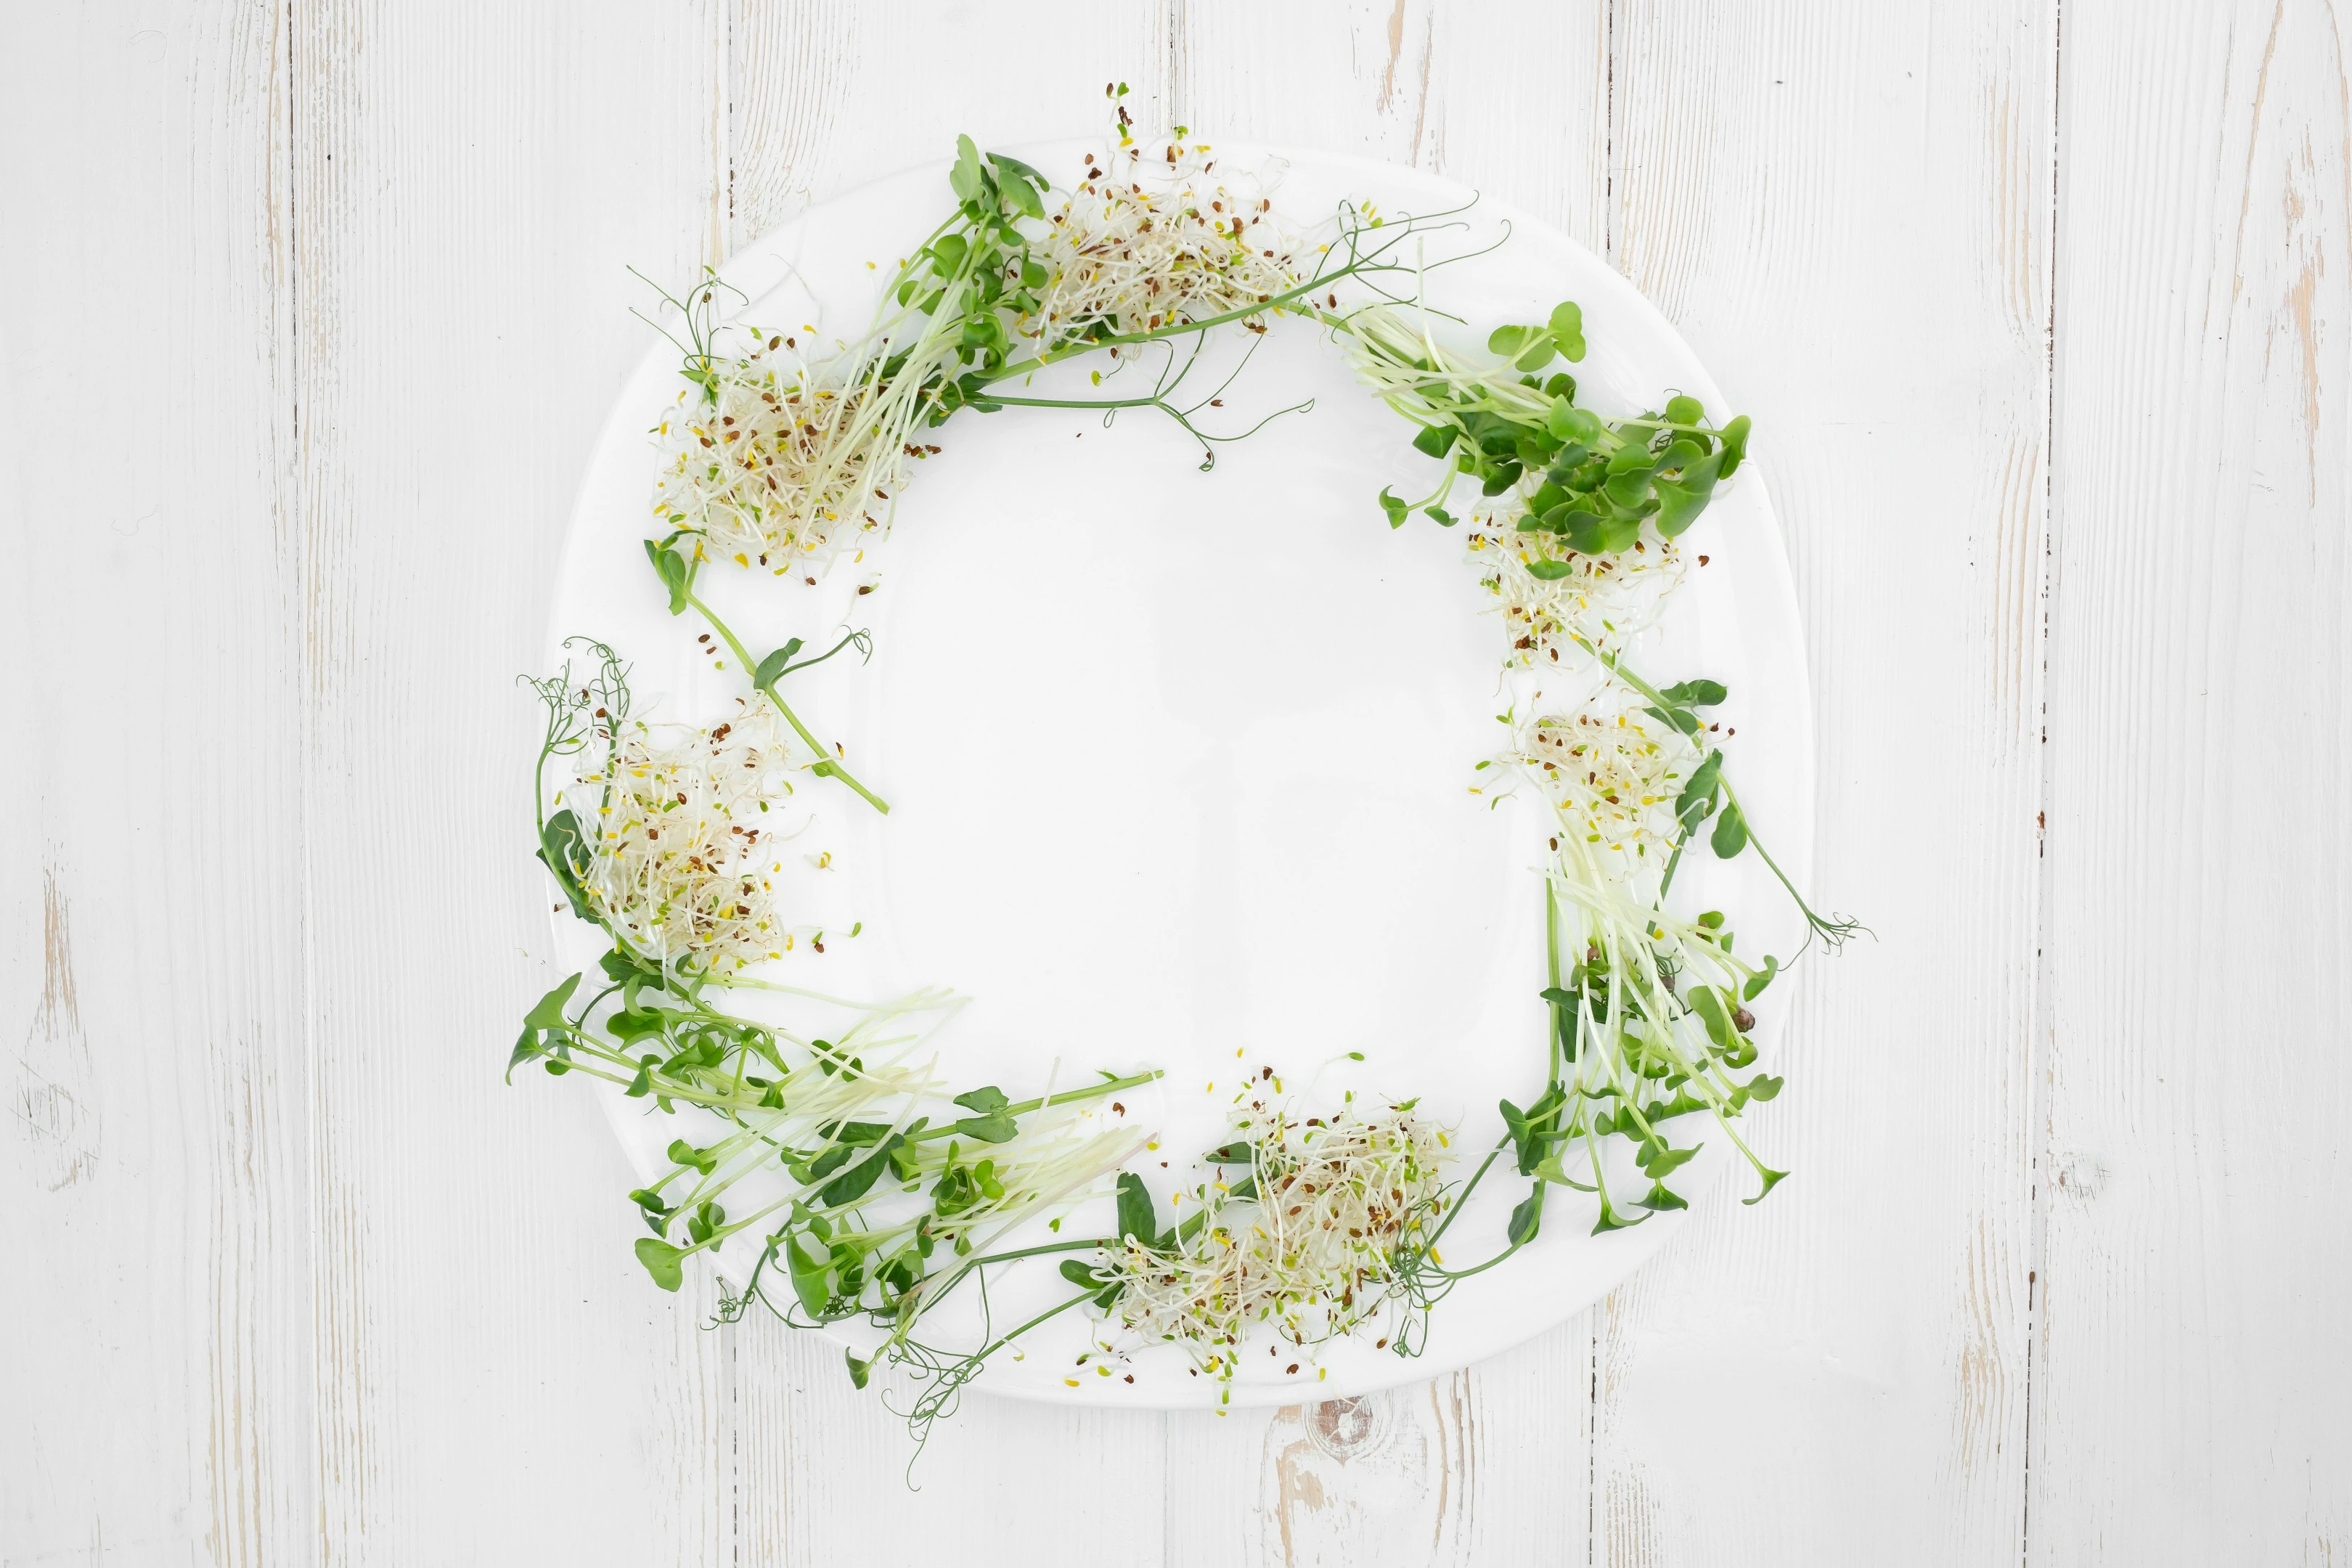 White Plate With Pea Radish and Alfalfa Sprouts